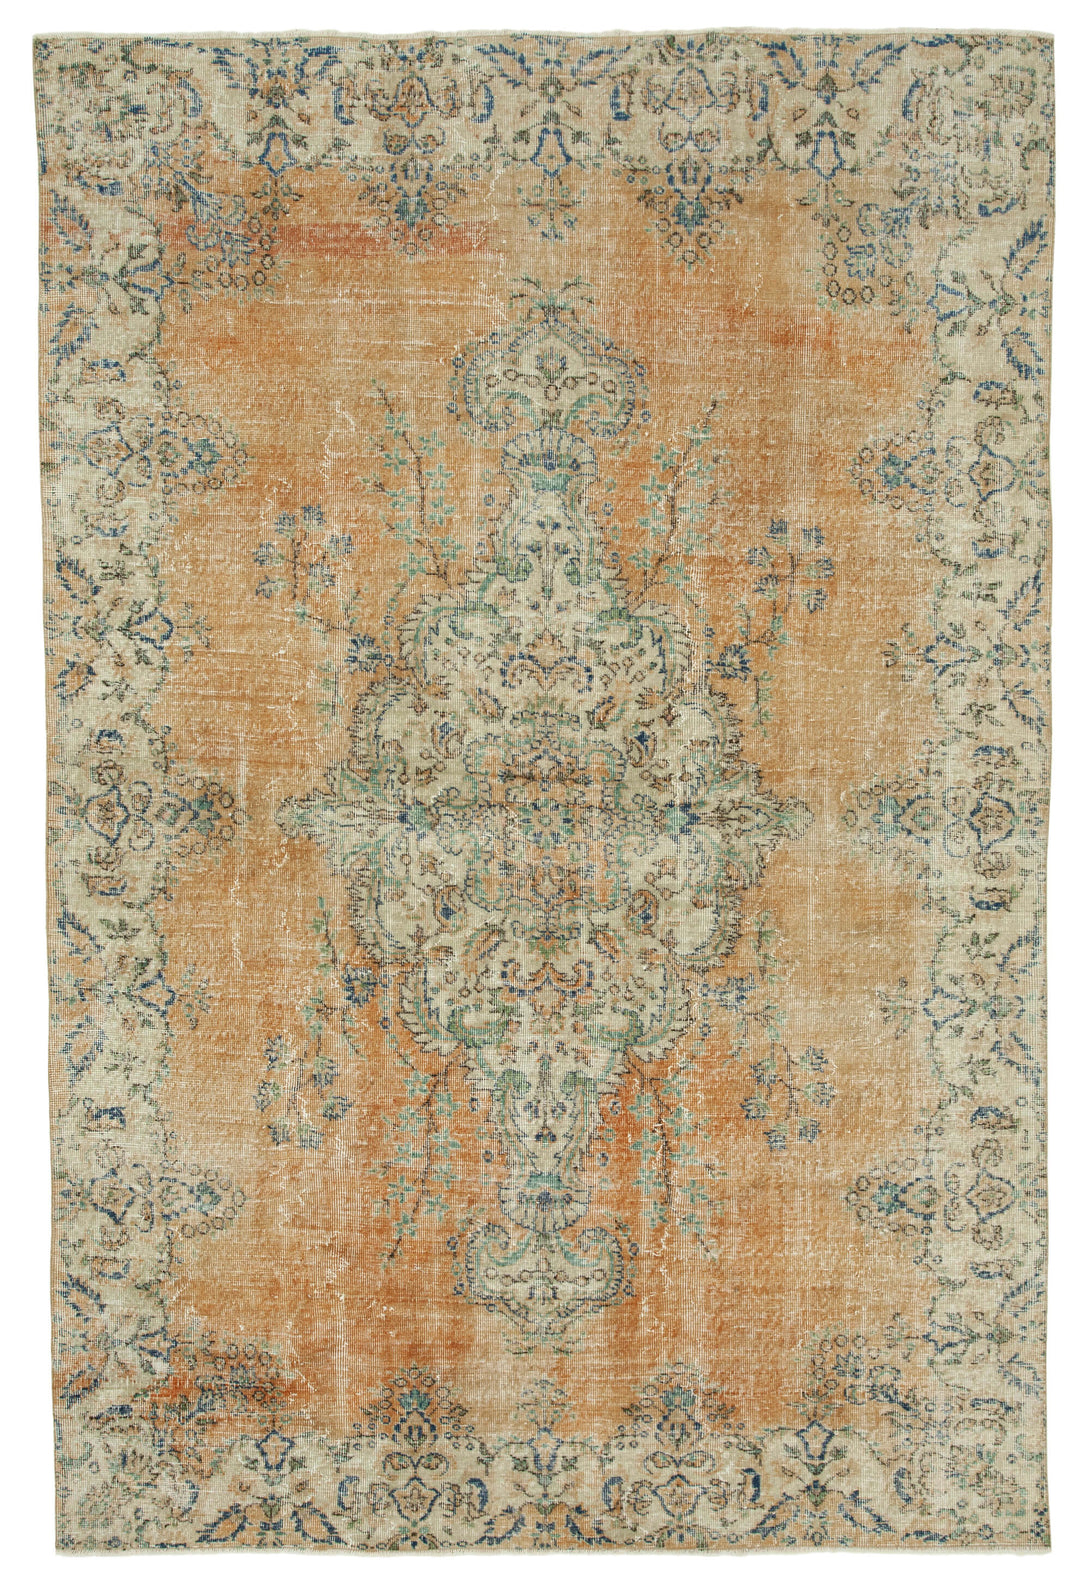 Handmade White Wash Area Rug > Design# OL-AC-36671 > Size: 6'-11" x 10'-4", Carpet Culture Rugs, Handmade Rugs, NYC Rugs, New Rugs, Shop Rugs, Rug Store, Outlet Rugs, SoHo Rugs, Rugs in USA